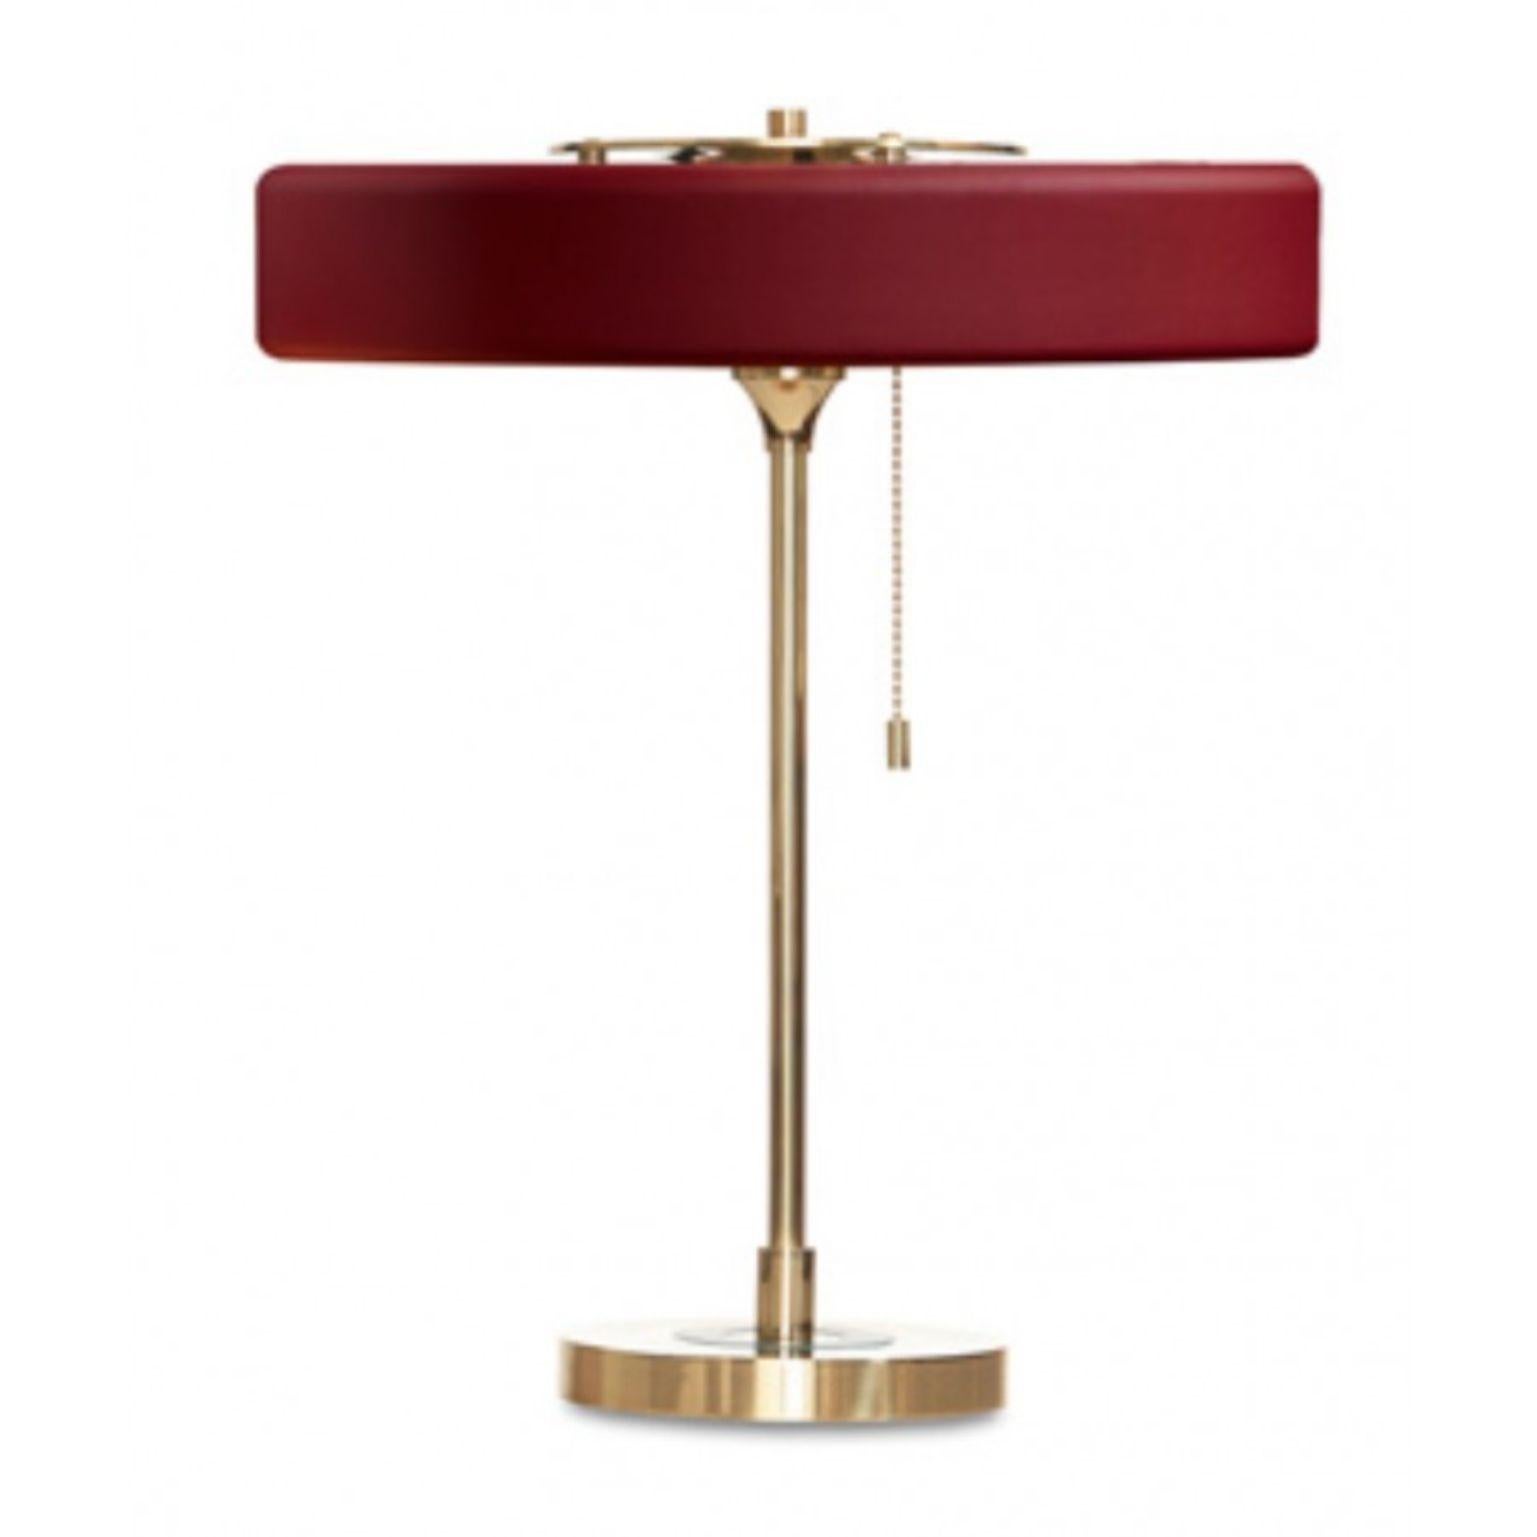 Revolve table lamp - polished brass - Oxblood by Bert Frank
Dimensions: 42 x 35 x 15 cm
Materials: Brass, steel

Also available in brushed brass

When Adam Yeats and Robbie Llewellyn founded Bert Frank in 2013 it was a meeting of minds and the